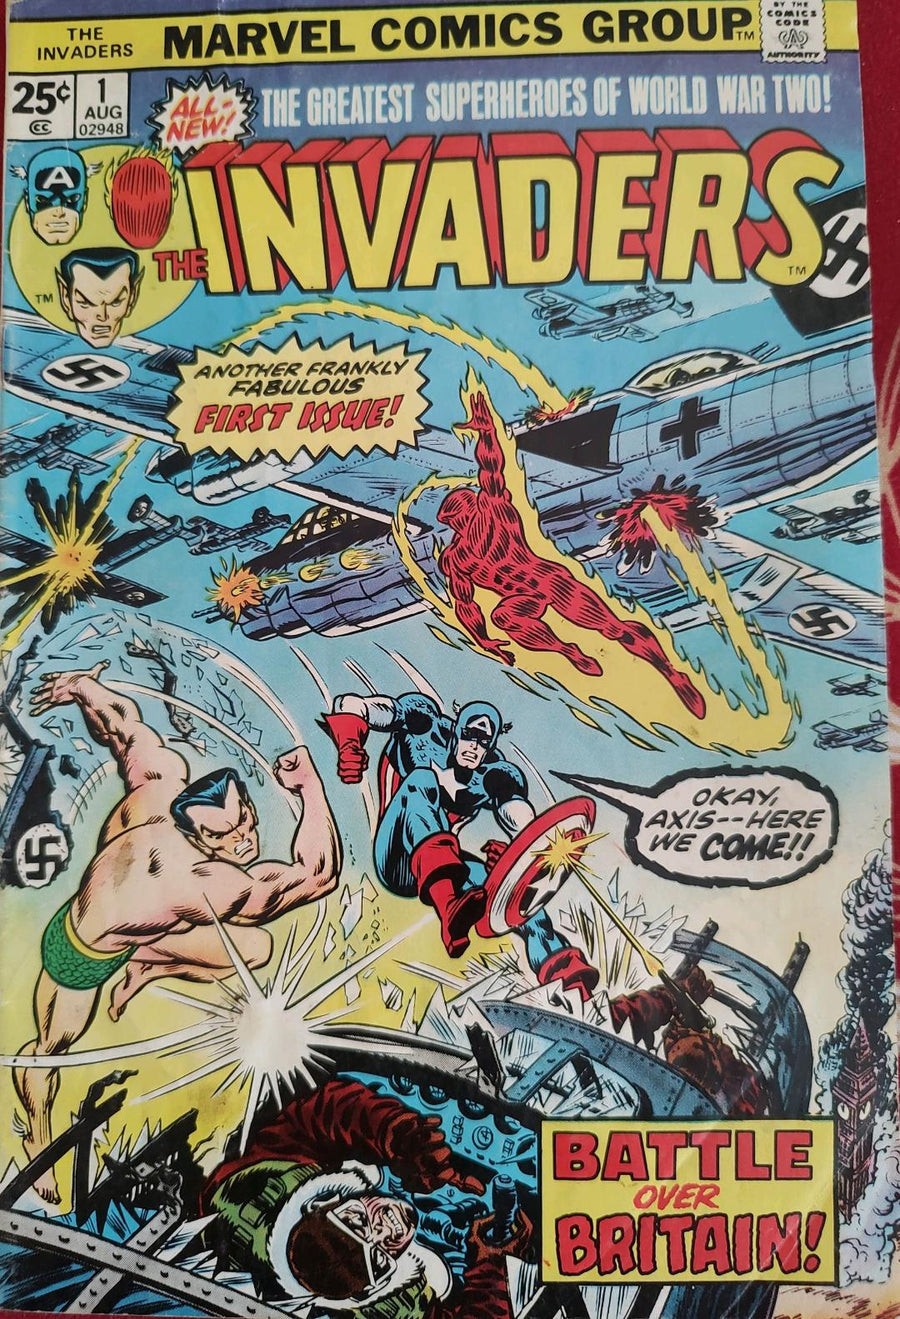 The Invaders #1 Comic Book Cover